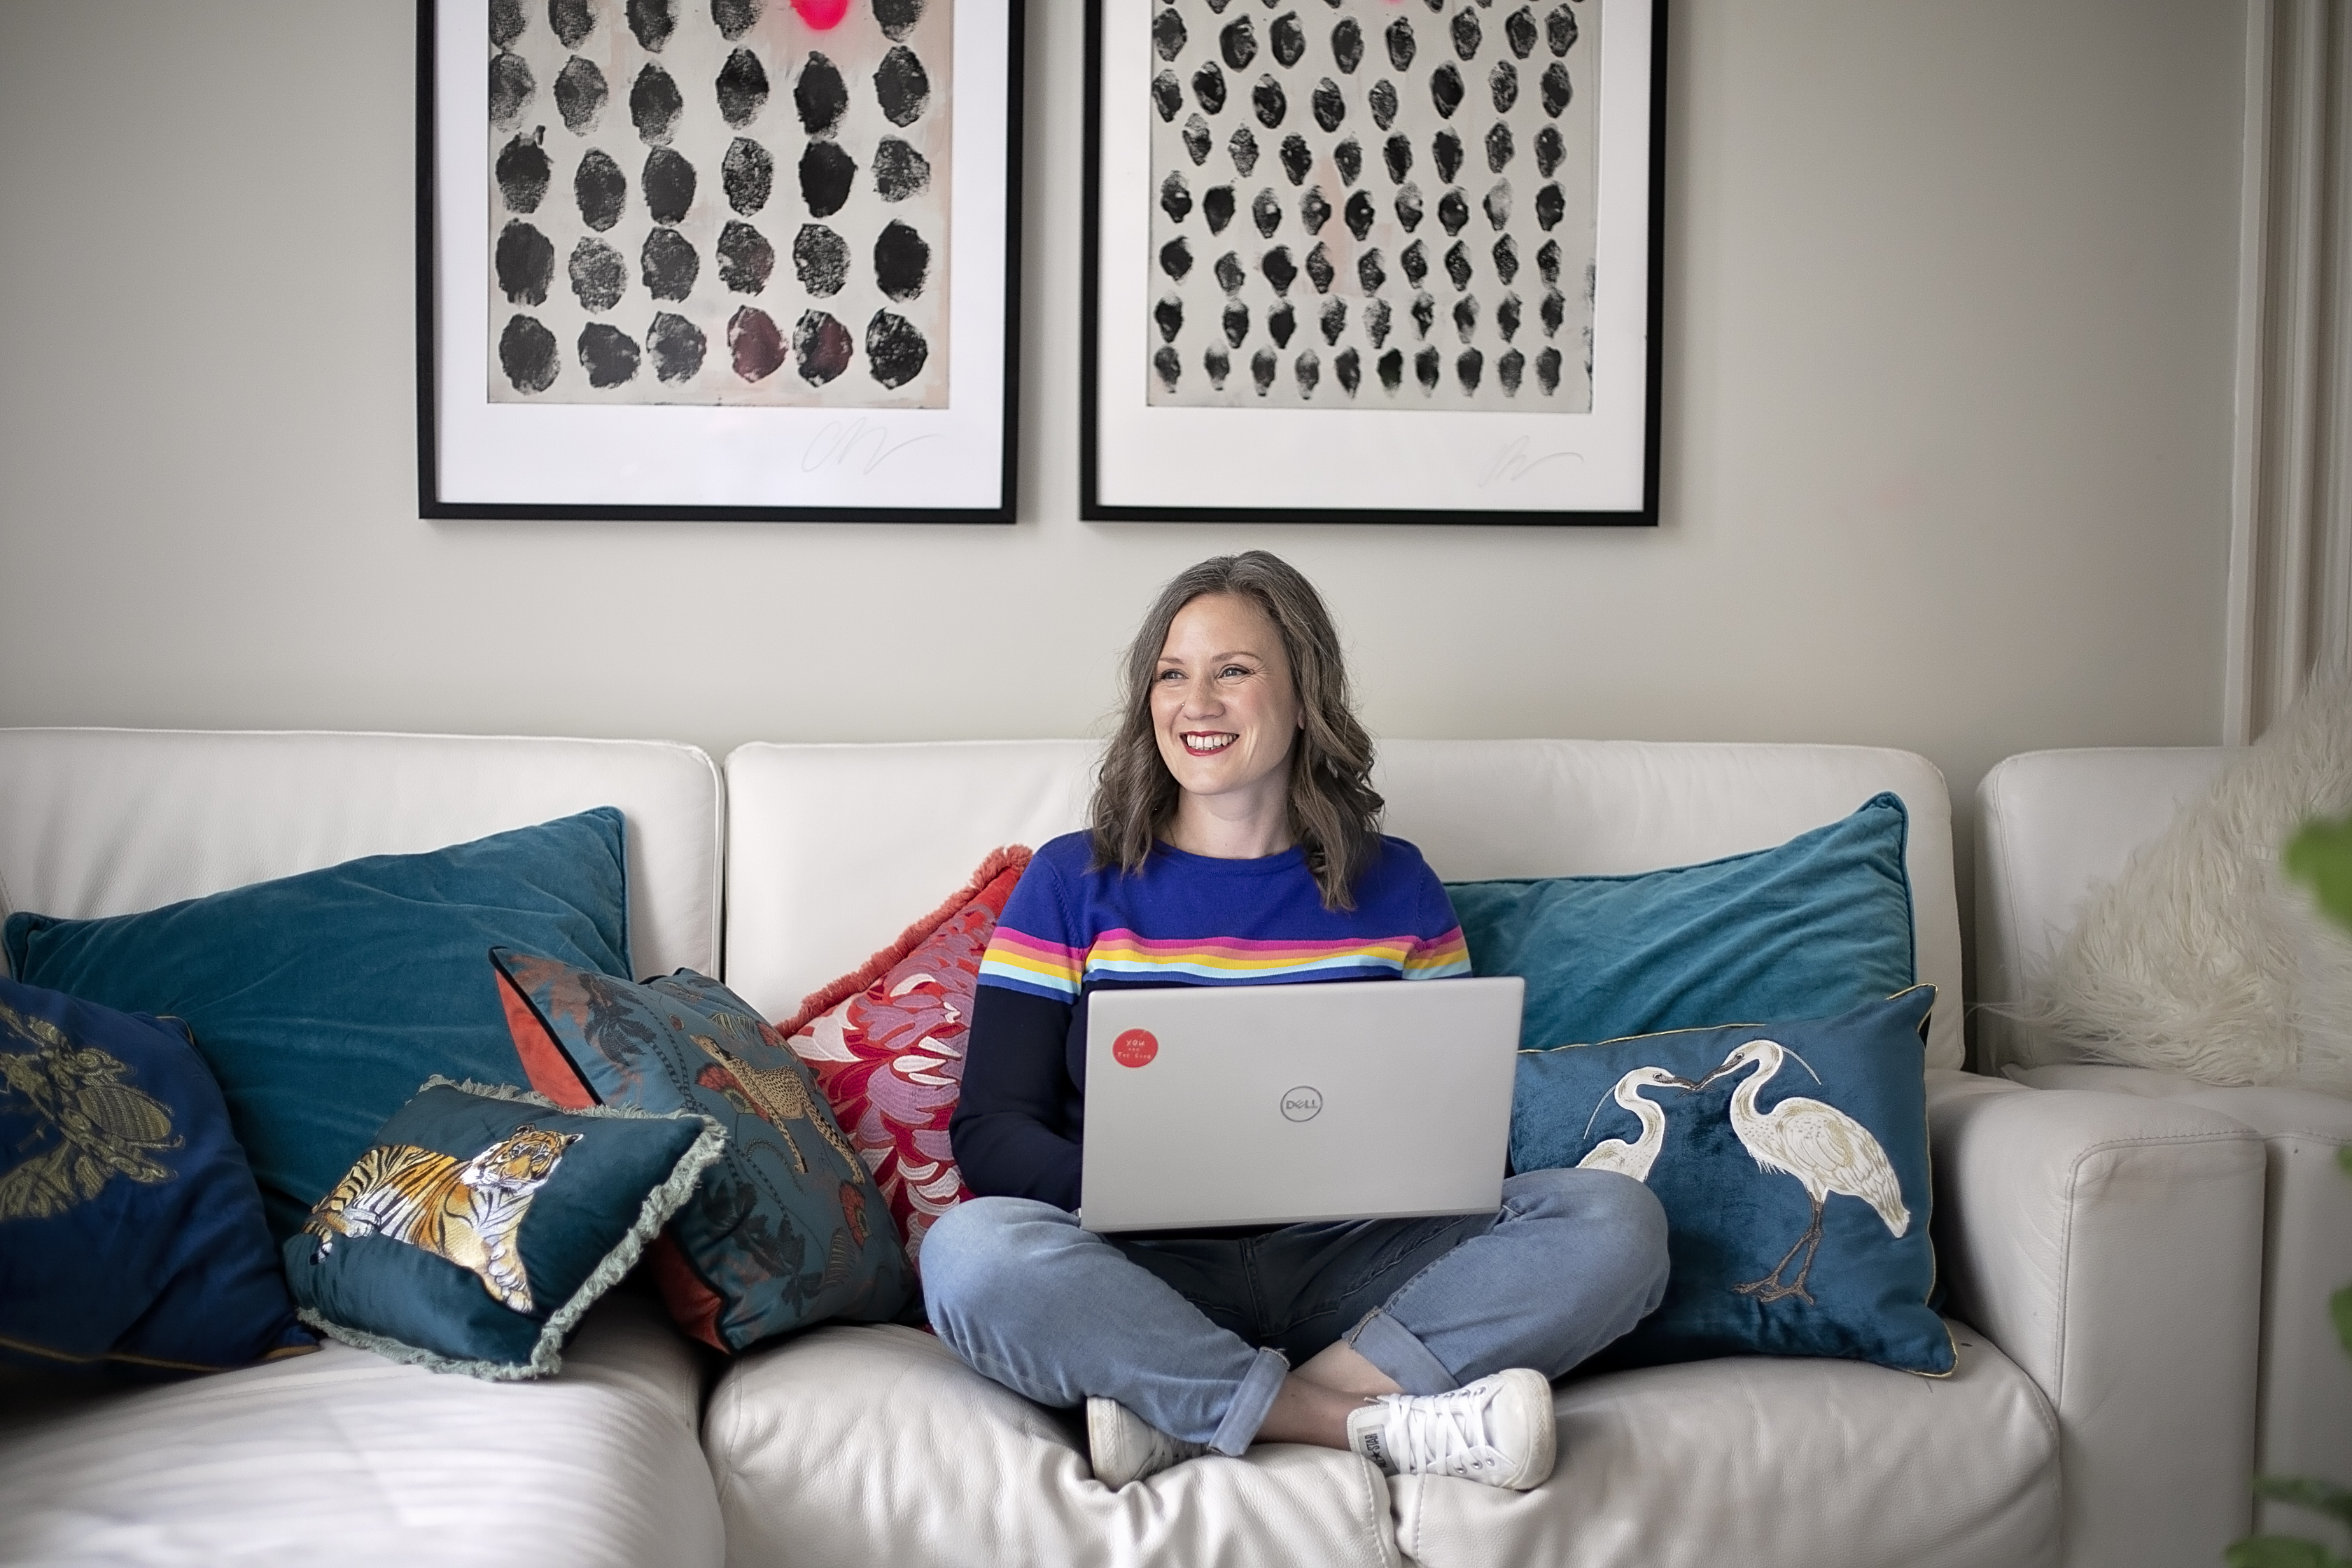 Hannah, a brown haired white woman, is sitting cross legged on a sofa with her laptop on her lap. She's giving the impression of building connections with her mailing list